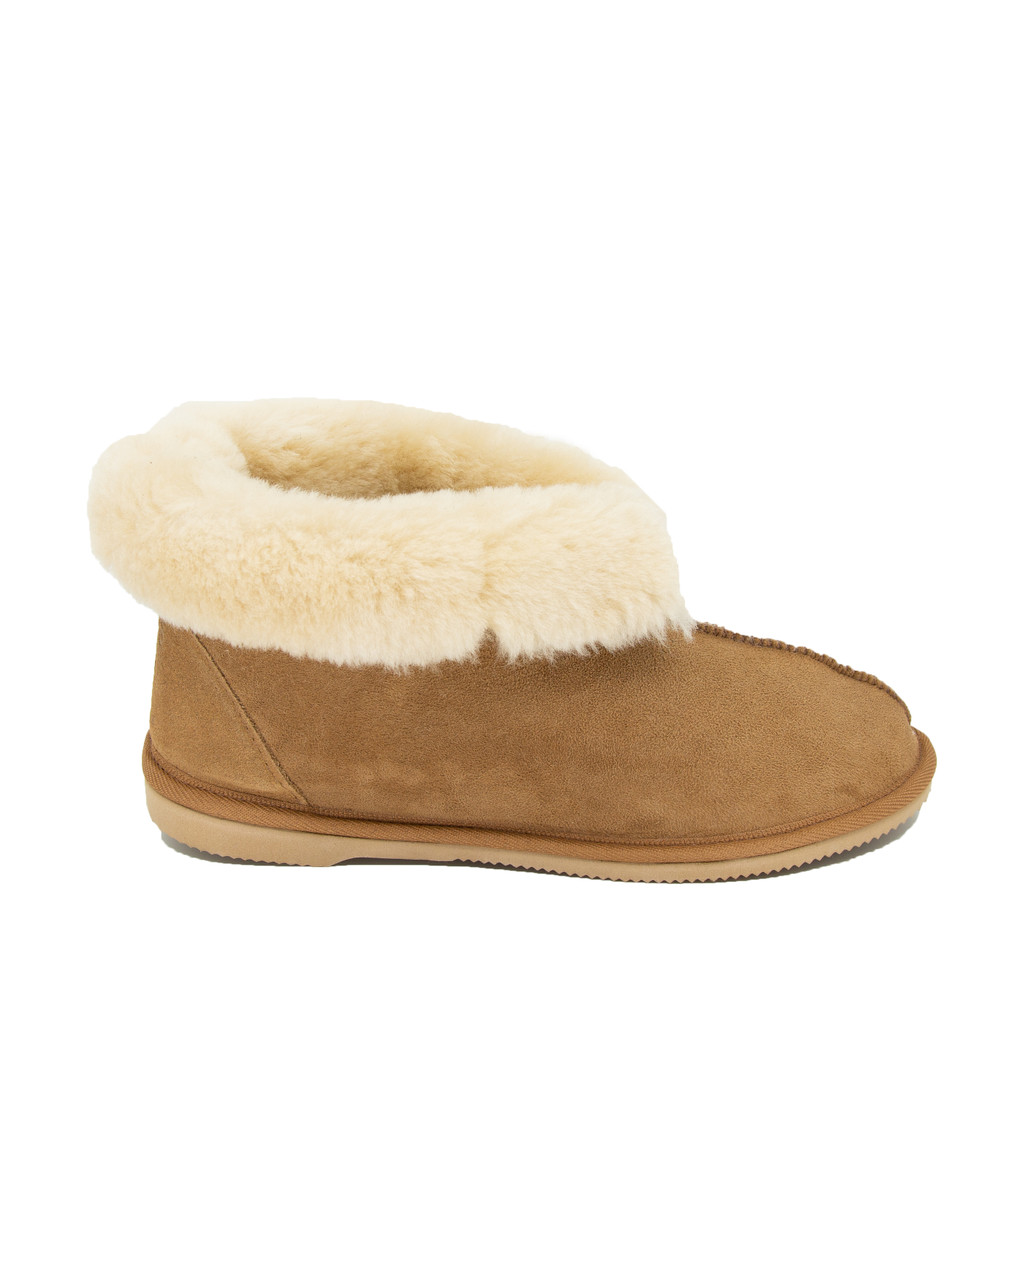 Classic Slipper - Two Sheep for Your Two Feet